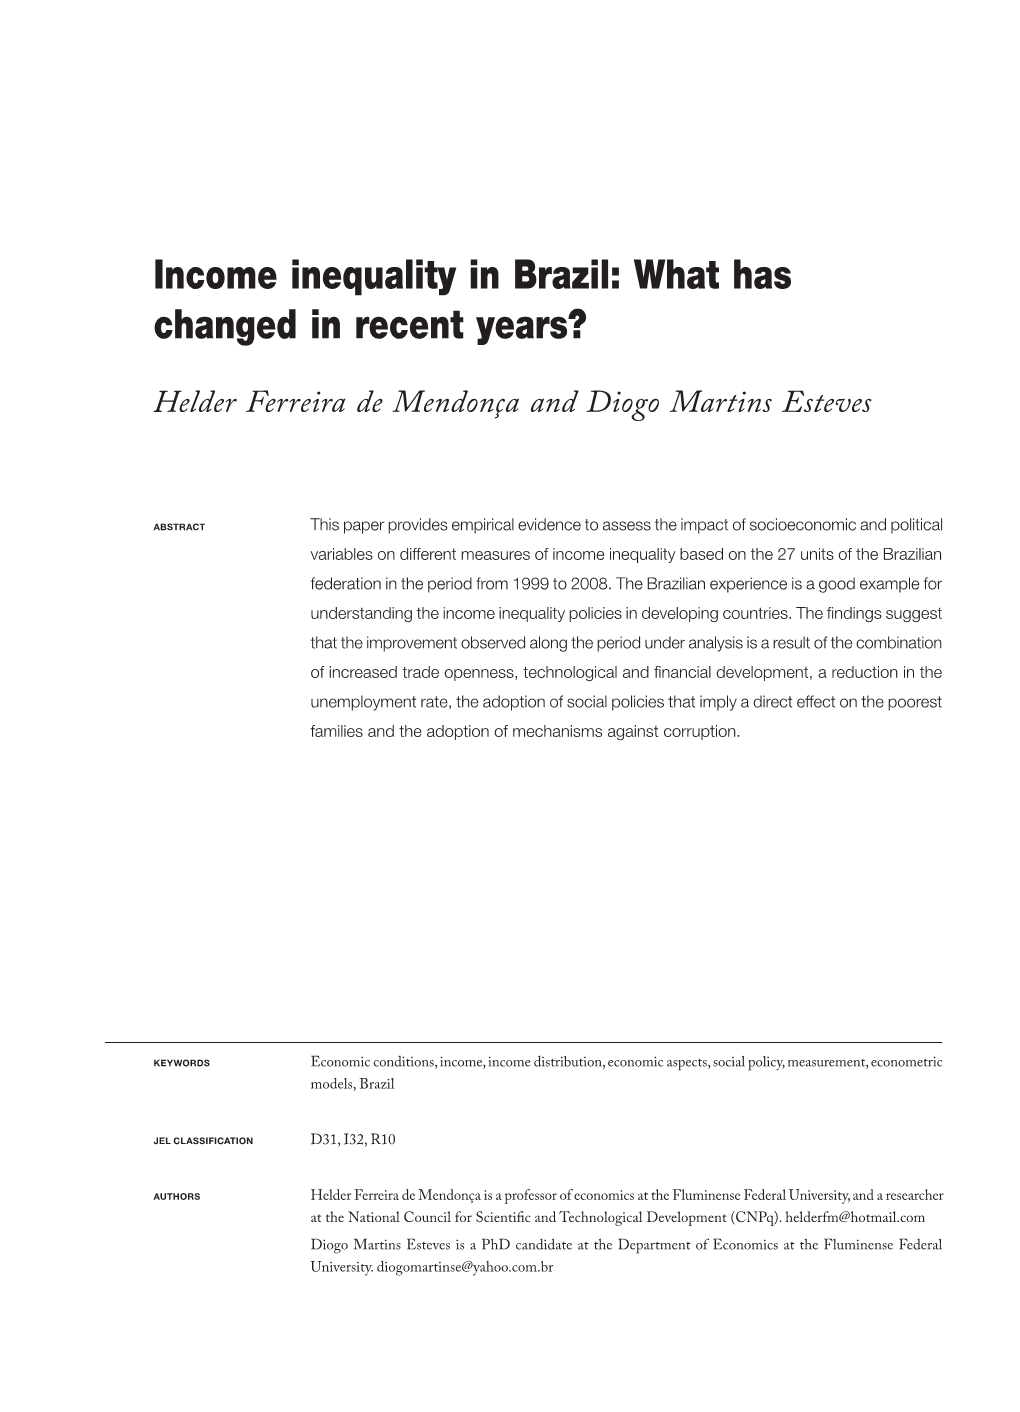 Income Inequality in Brazil: What Has Changed in Recent Years?